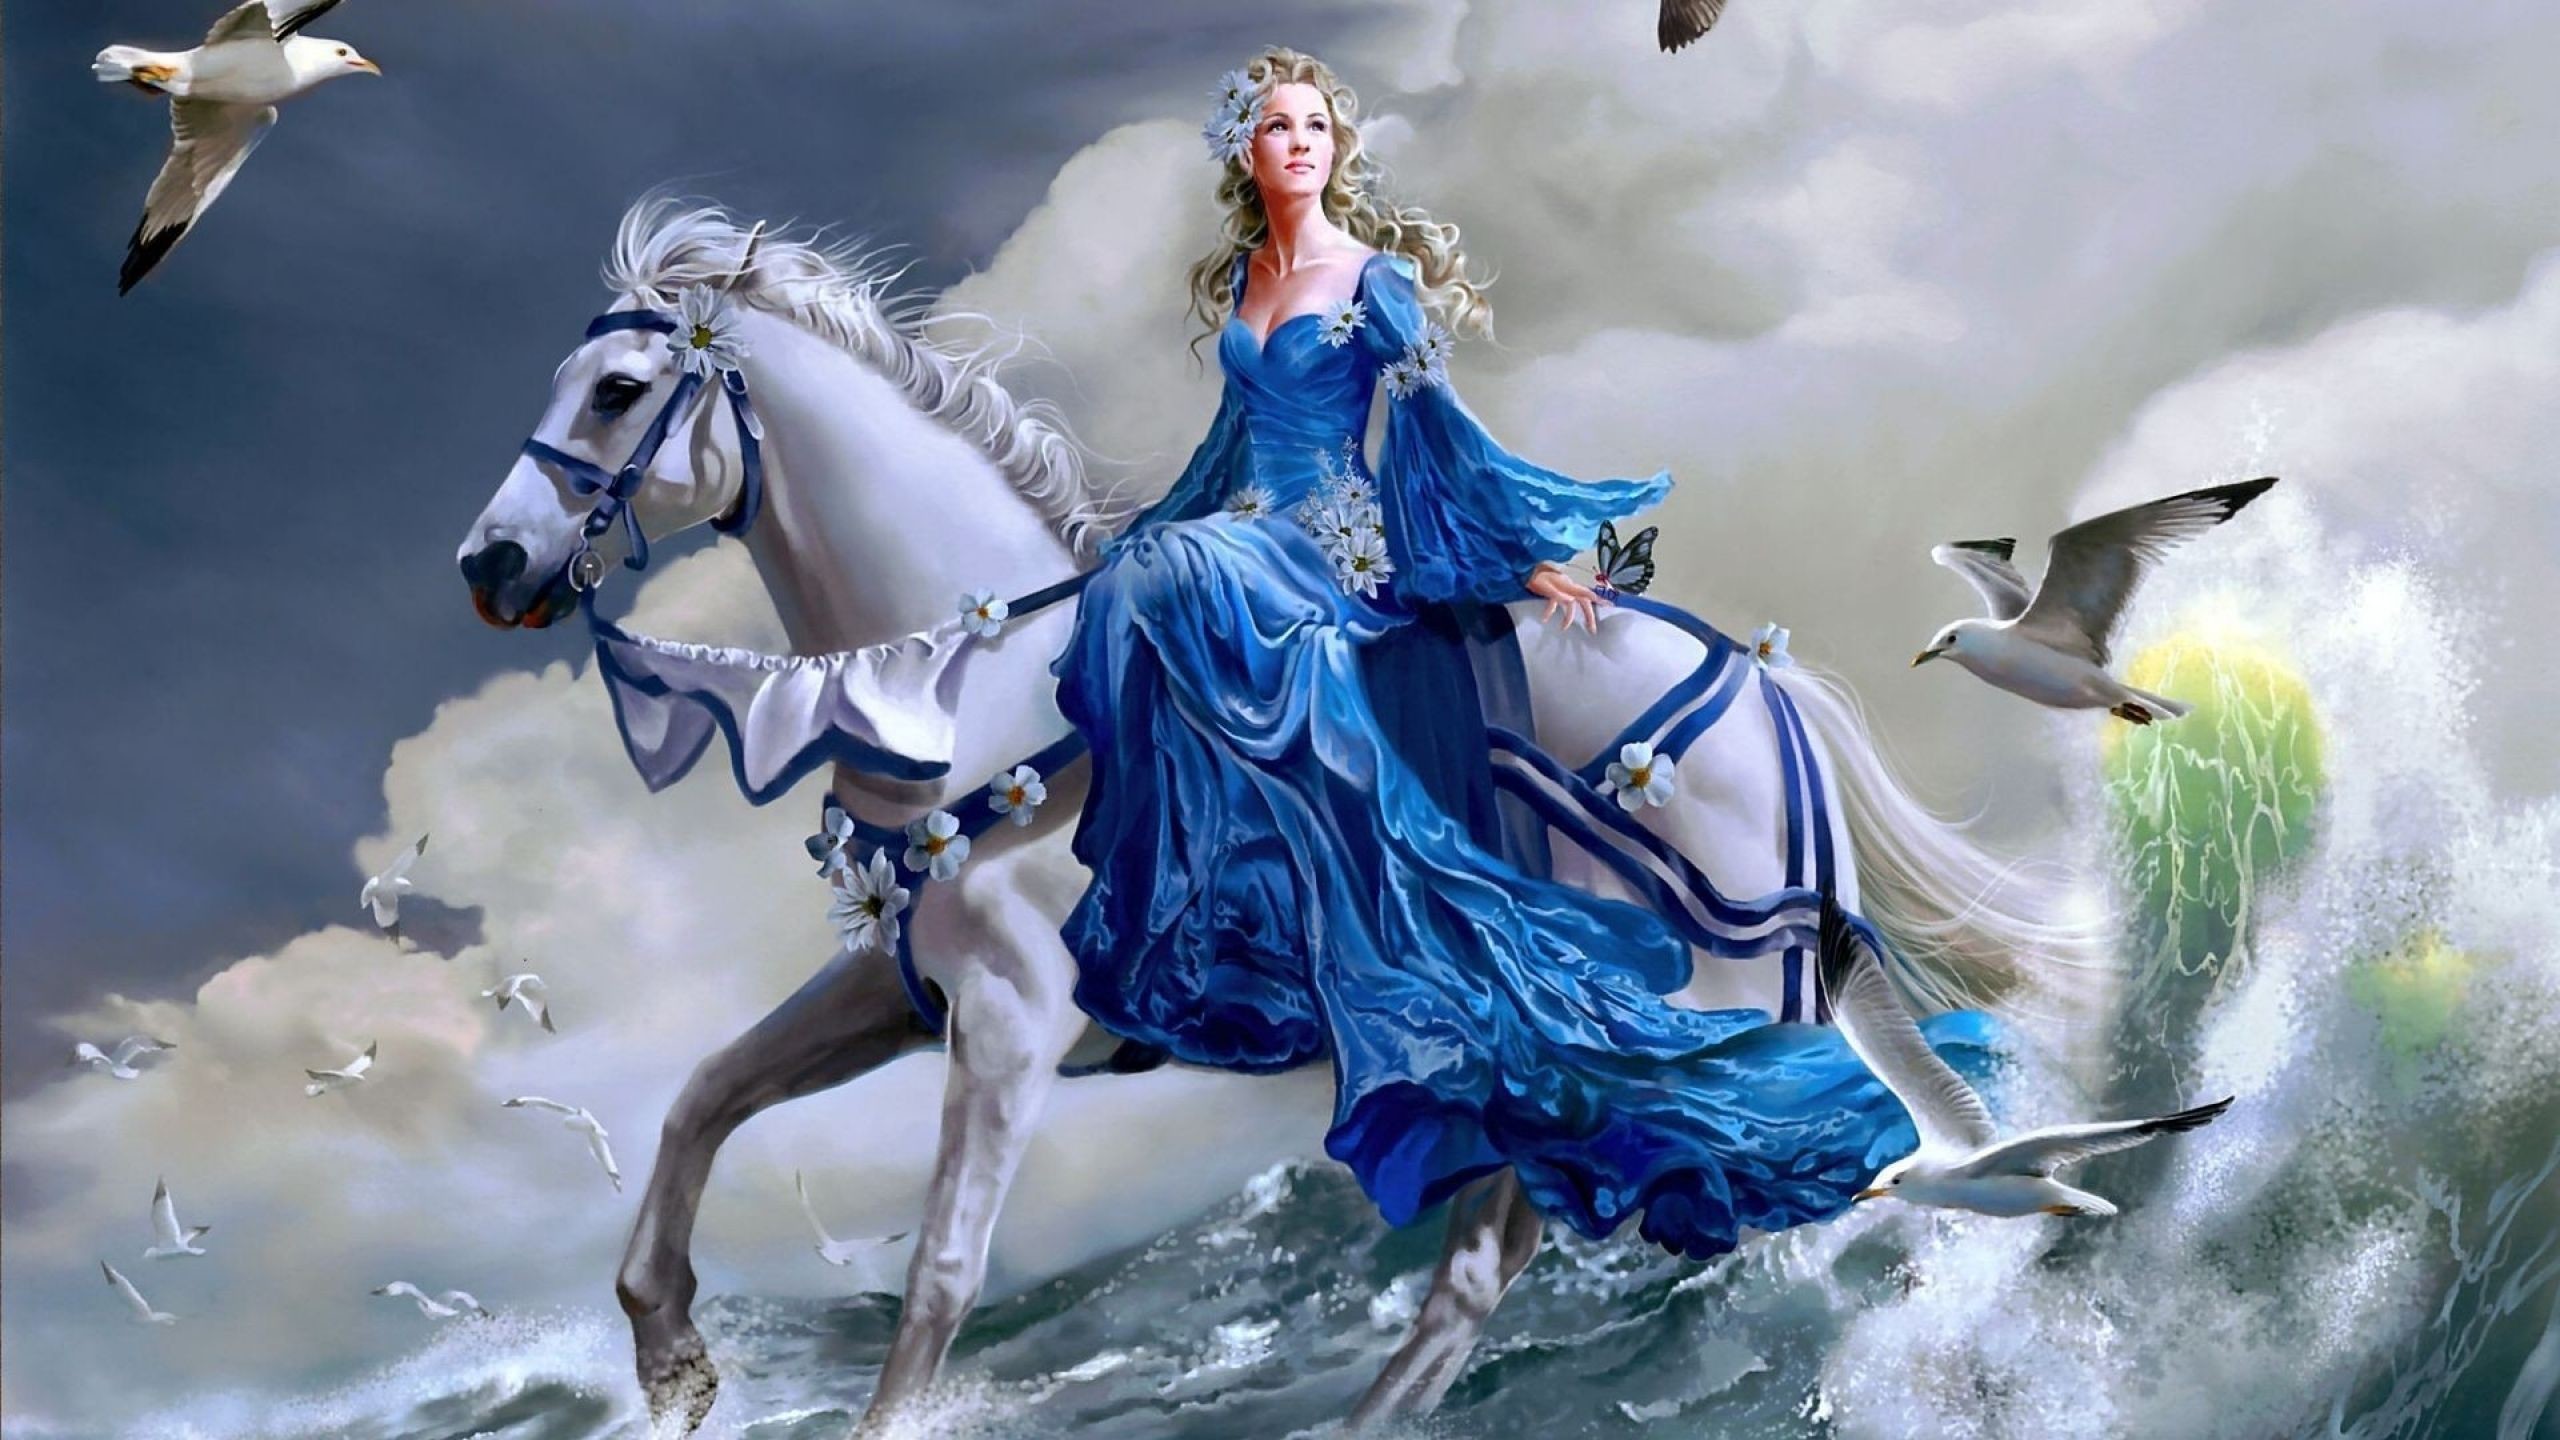 2560x1440 Girl Riding A Horse On Water  Fantasy Wallpaper 28685 .